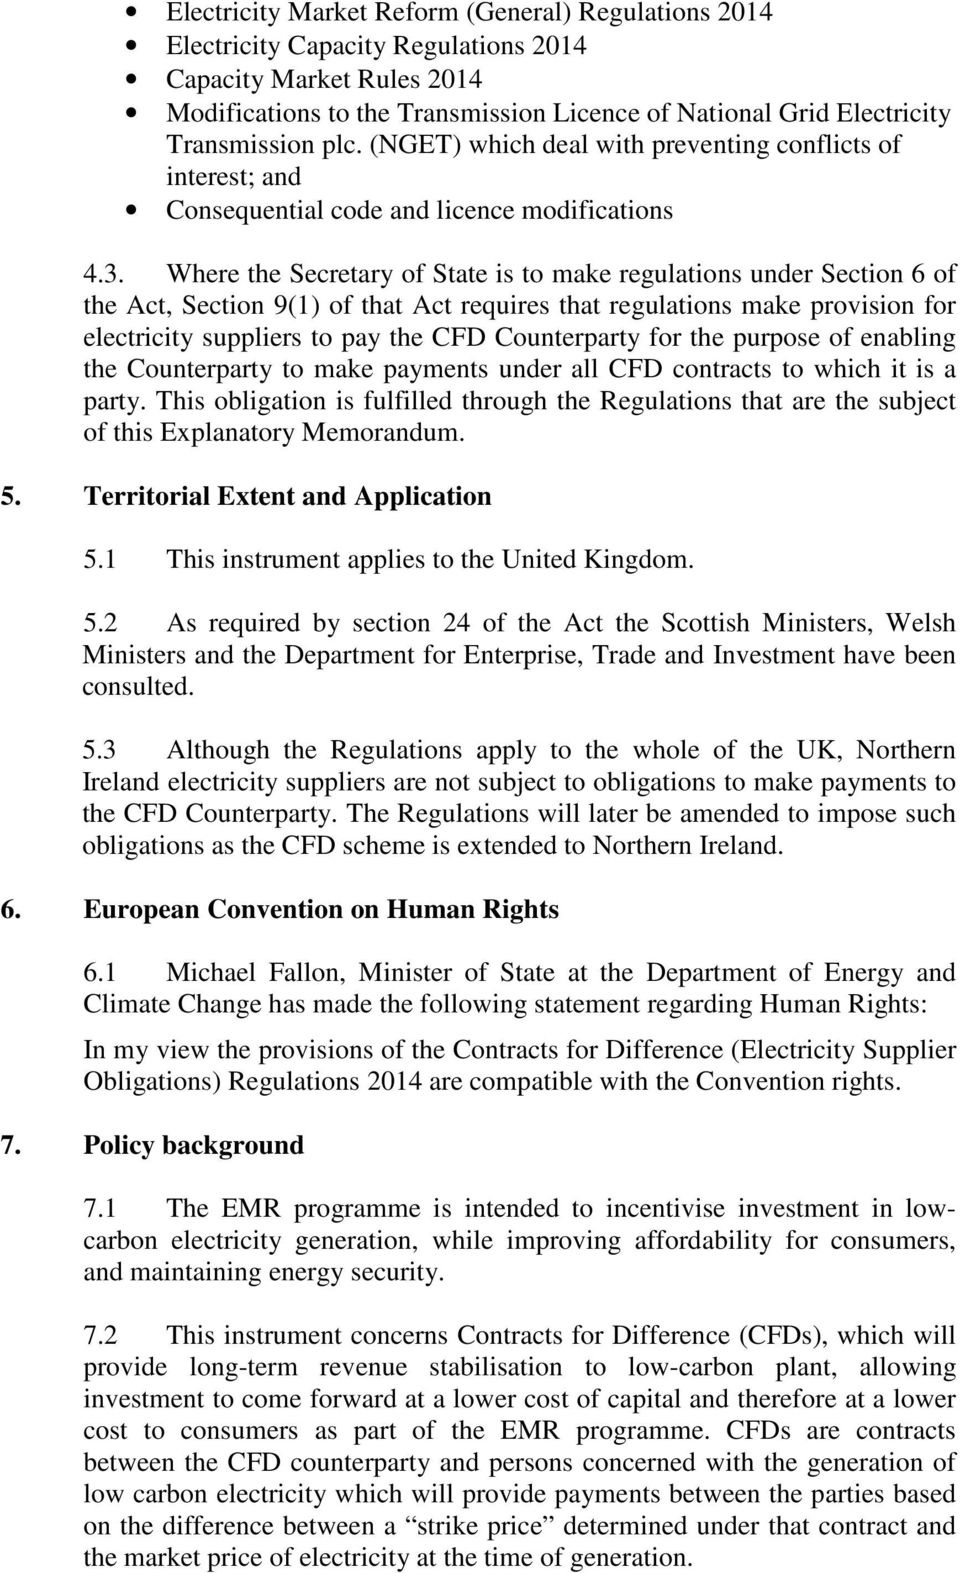 Where the Secretary of State is to make regulations under Section 6 of the Act, Section 9(1) of that Act requires that regulations make provision for electricity suppliers to pay the CFD Counterparty